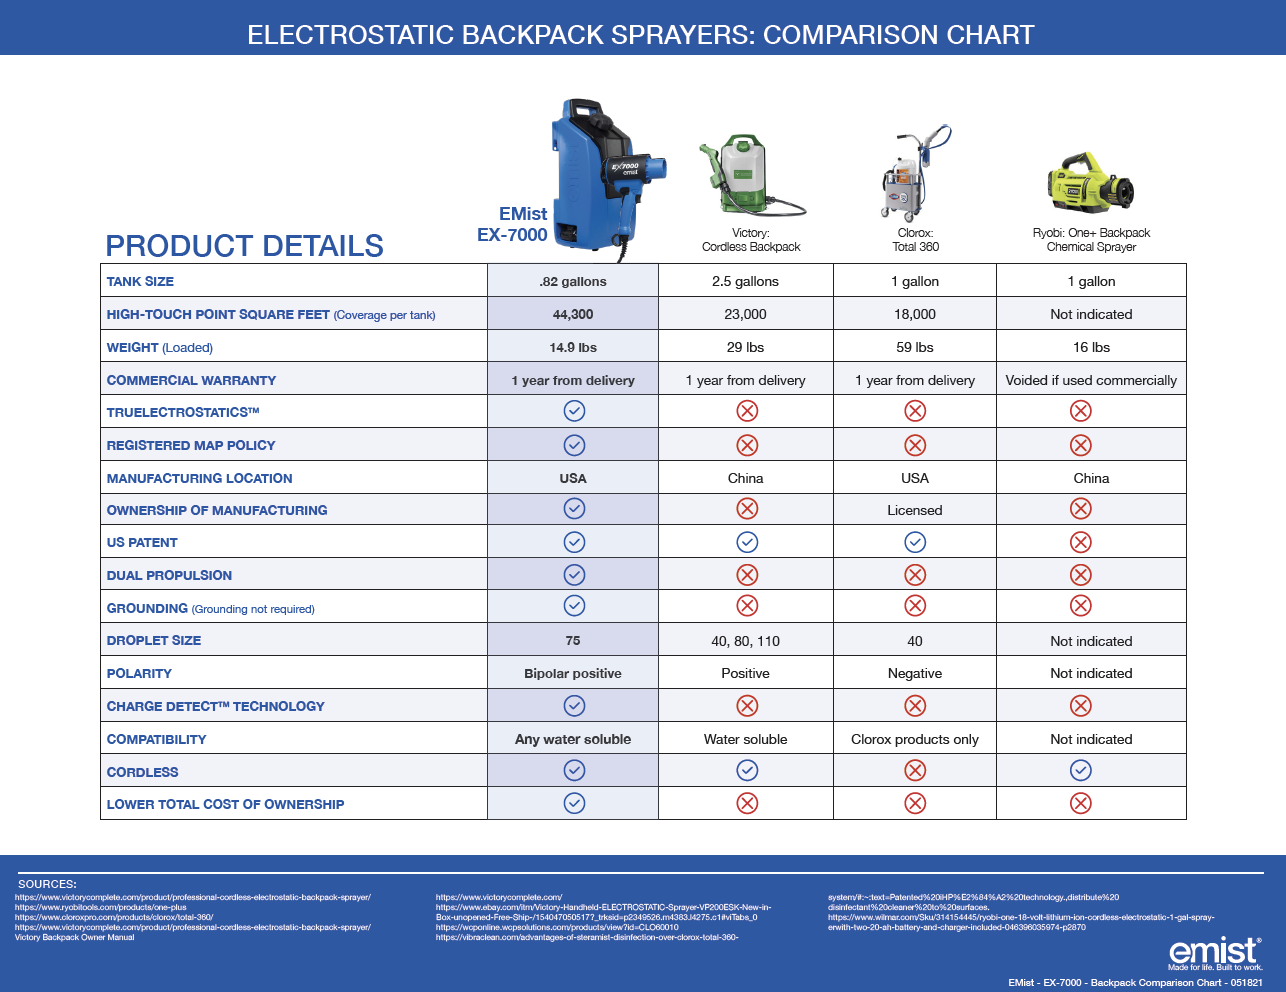 ELECTROSTATIC BACKPACK SPAYERS: COMPARISON CHART